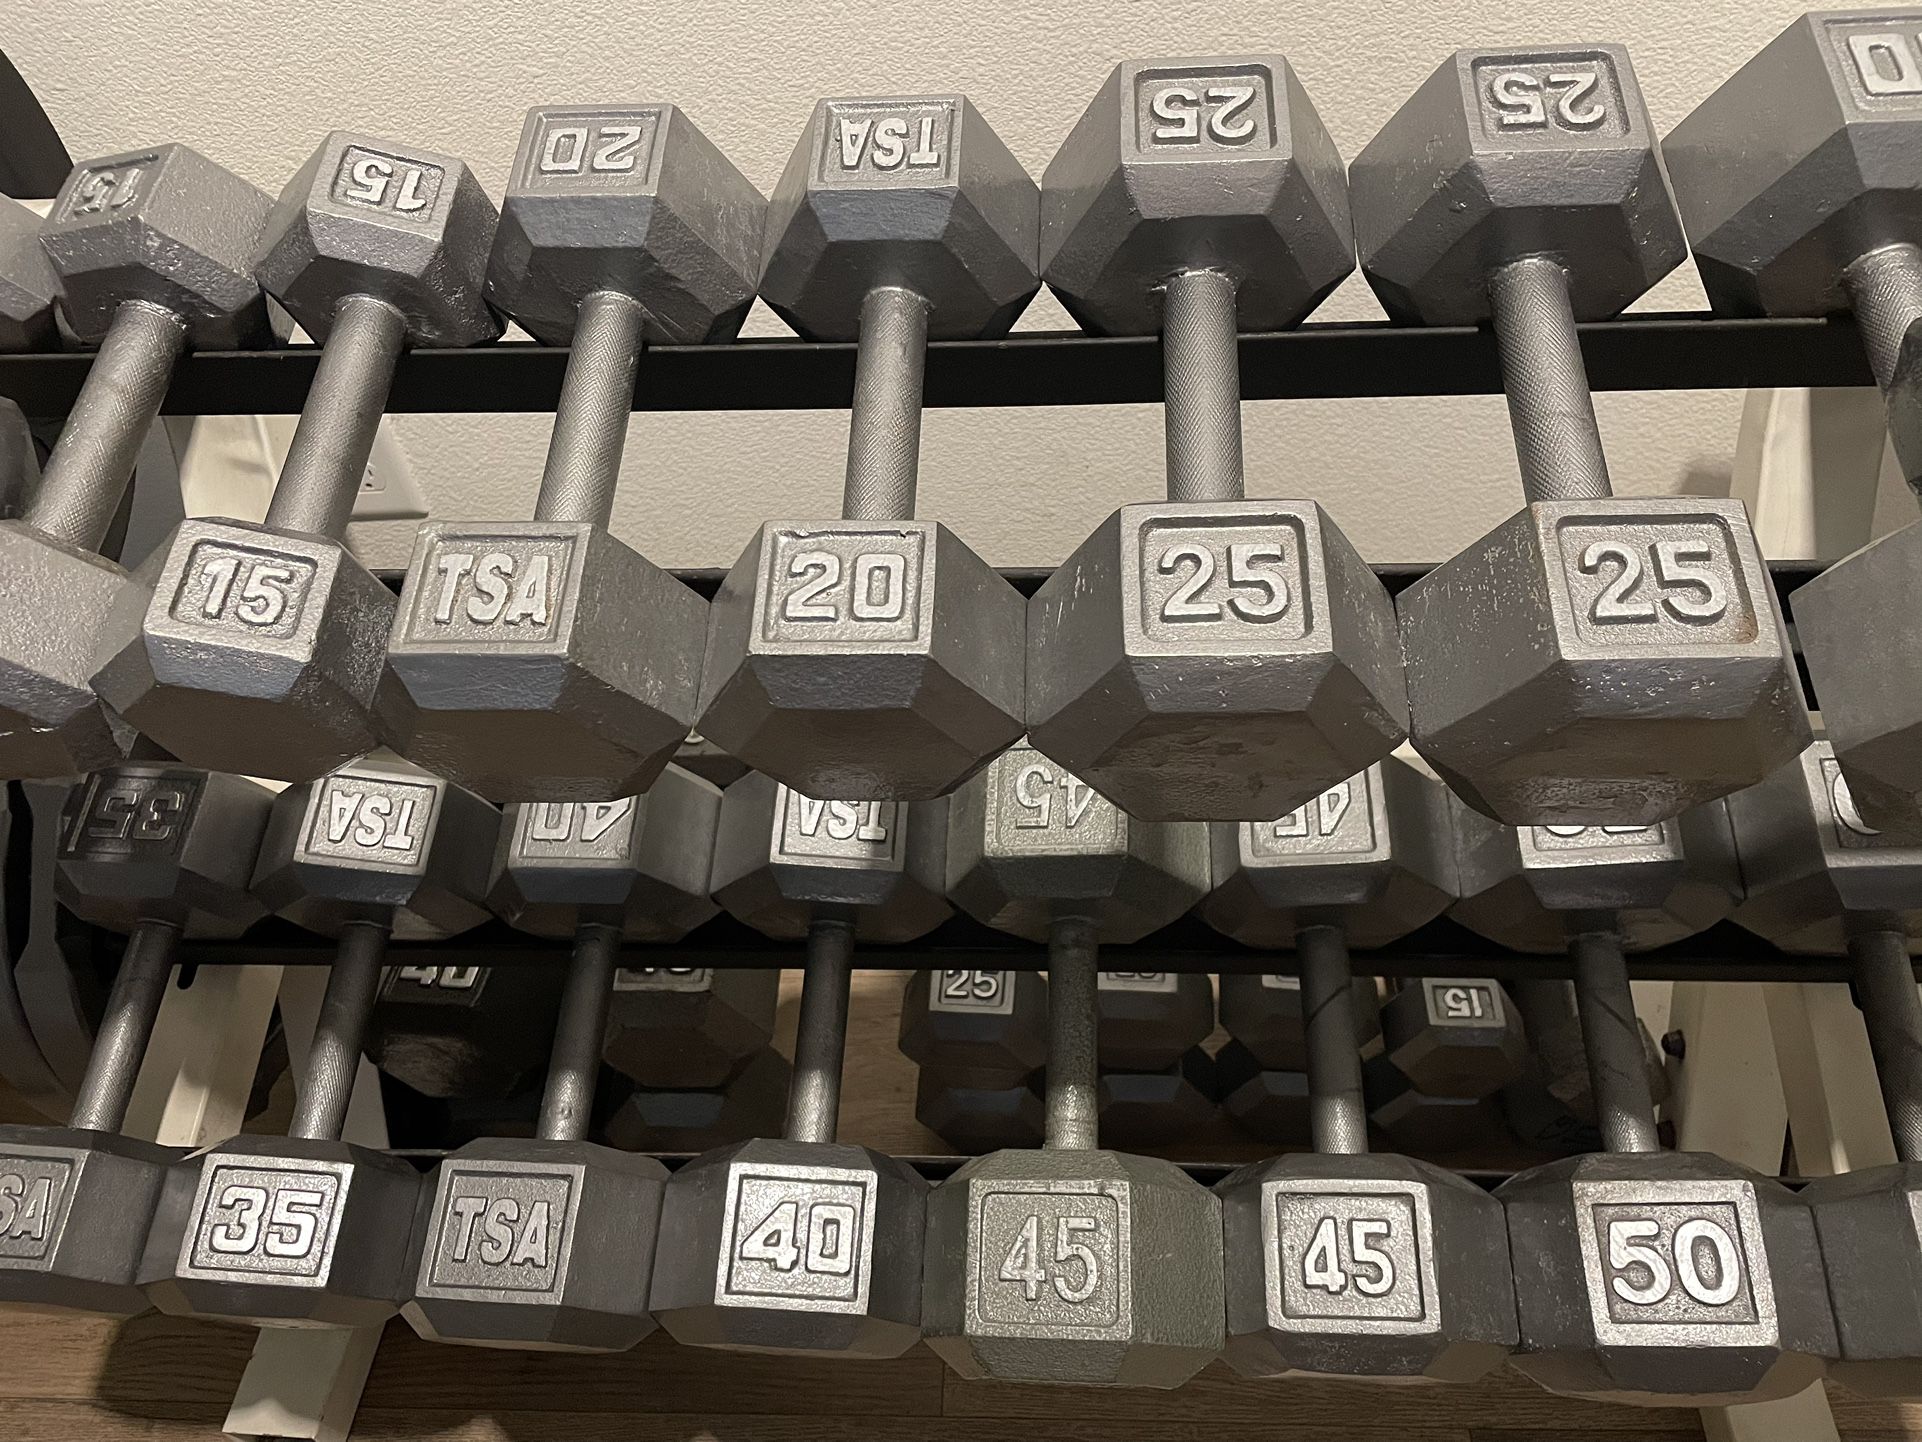 Hex Cast Iron Dumbbells From 5 lbs To 50 lbs Basically NEW